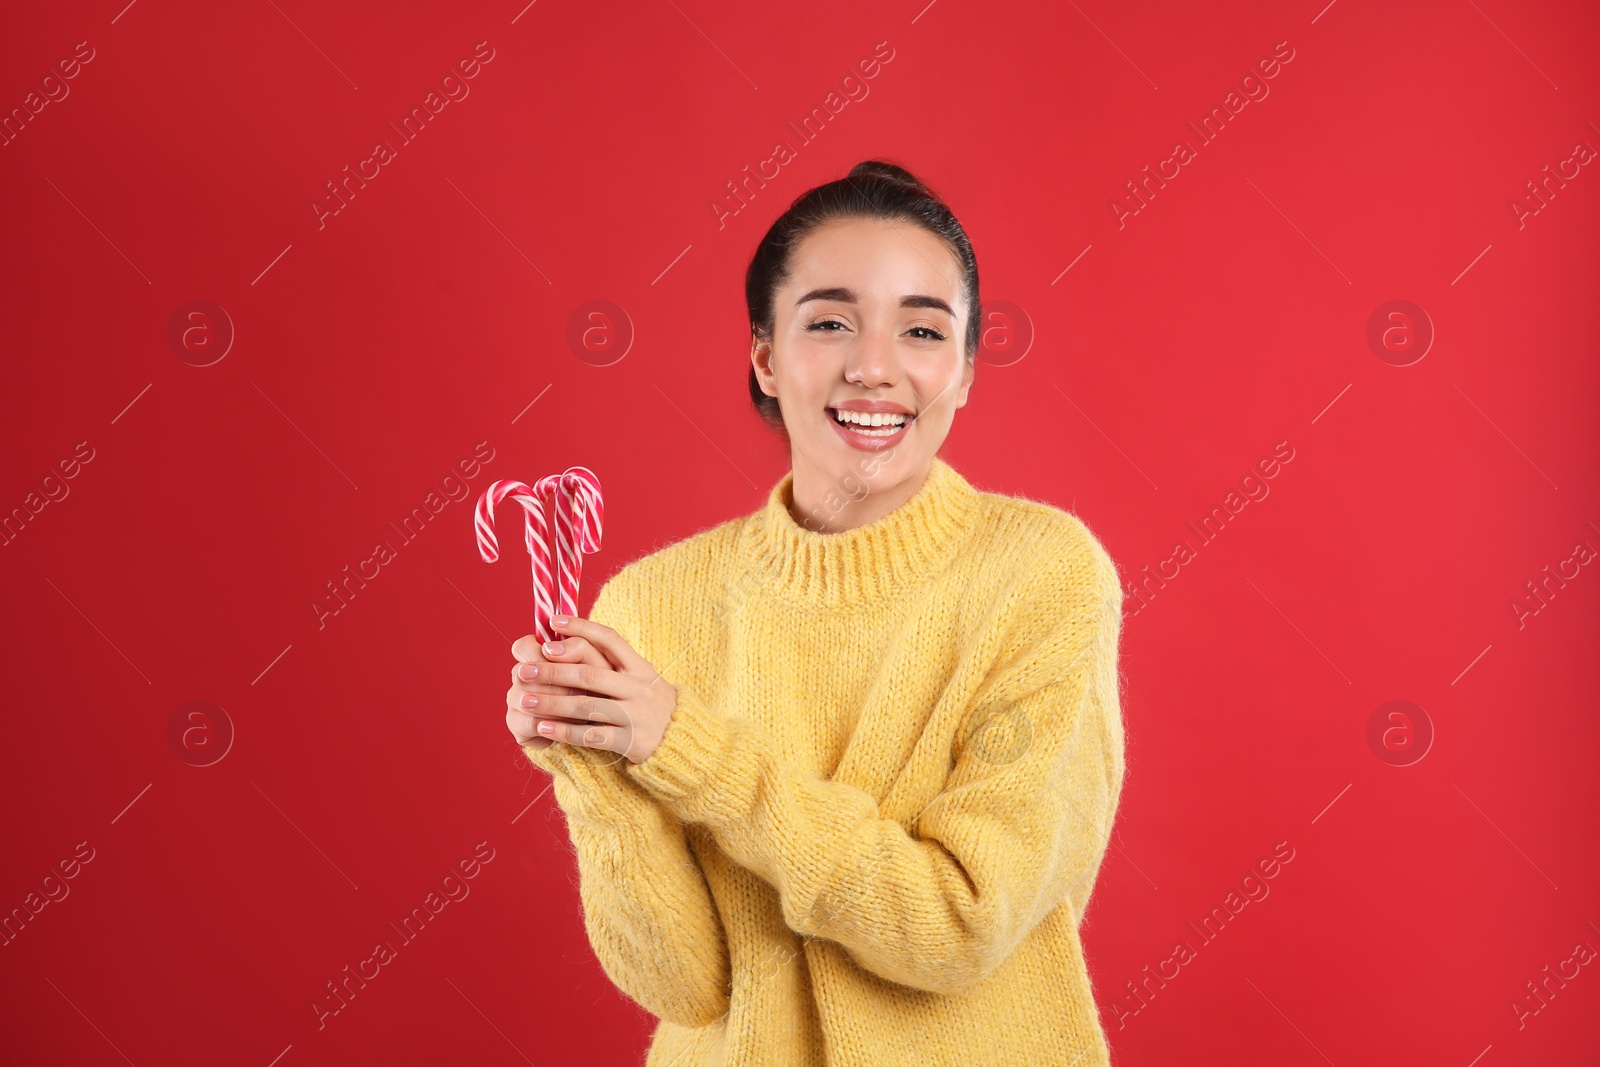 Photo of Young woman in yellow sweater holding candy canes on red background. Celebrating Christmas